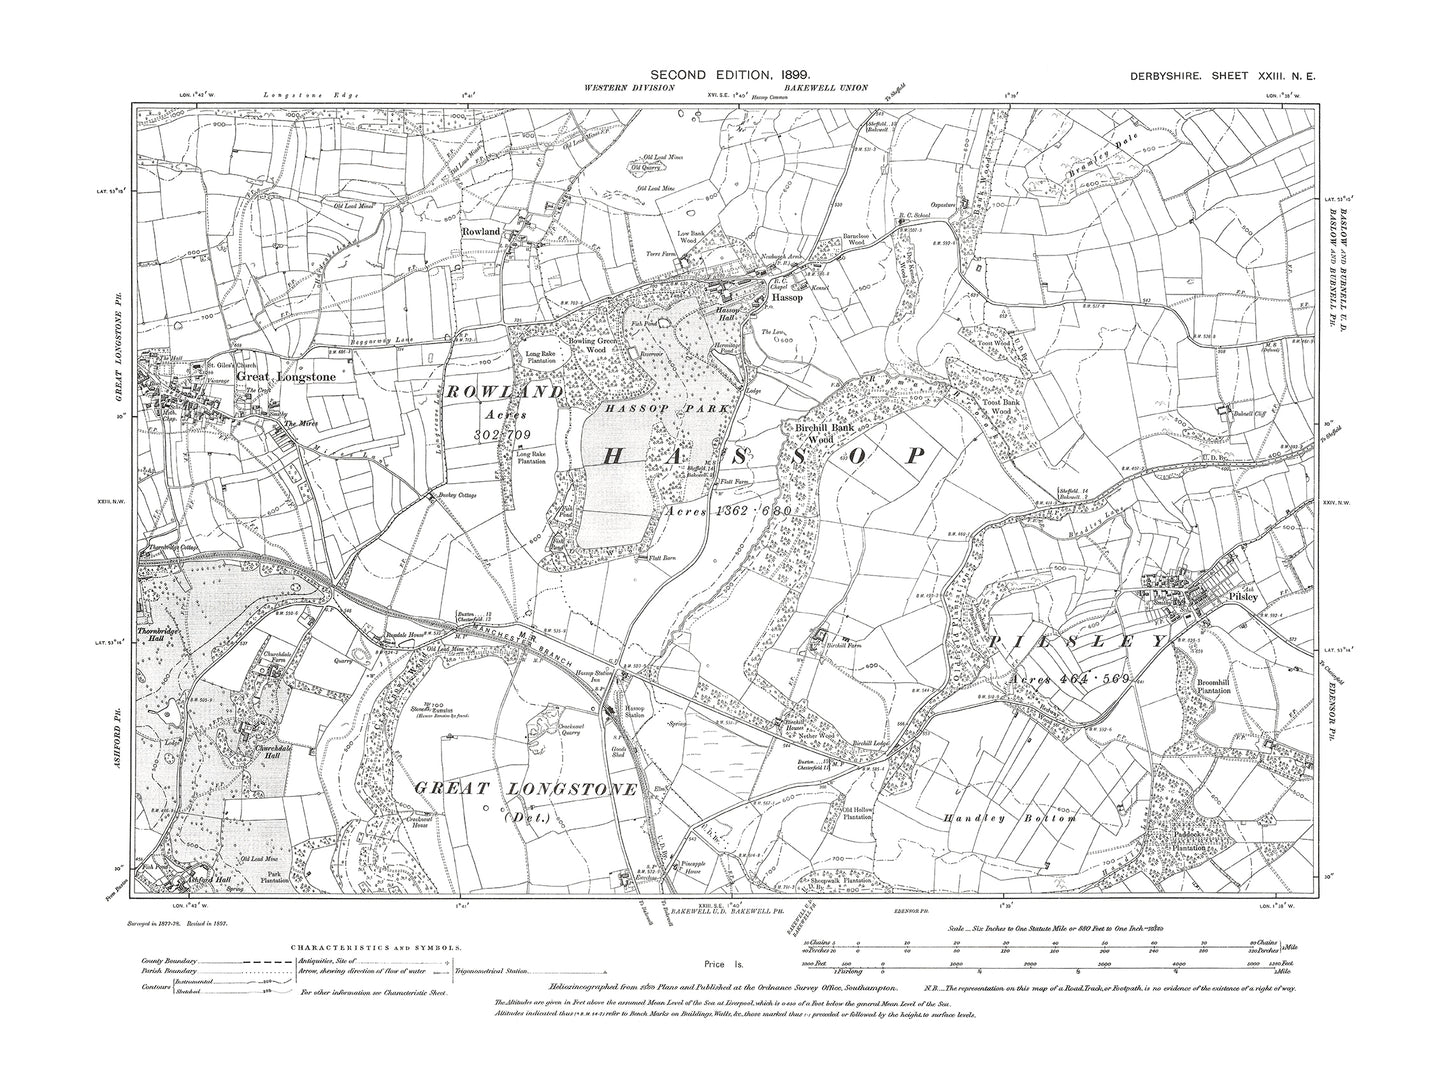 Old OS map dated 1899, showing Great Longstone, Pilsley, Hassop in Derbyshire 23NE